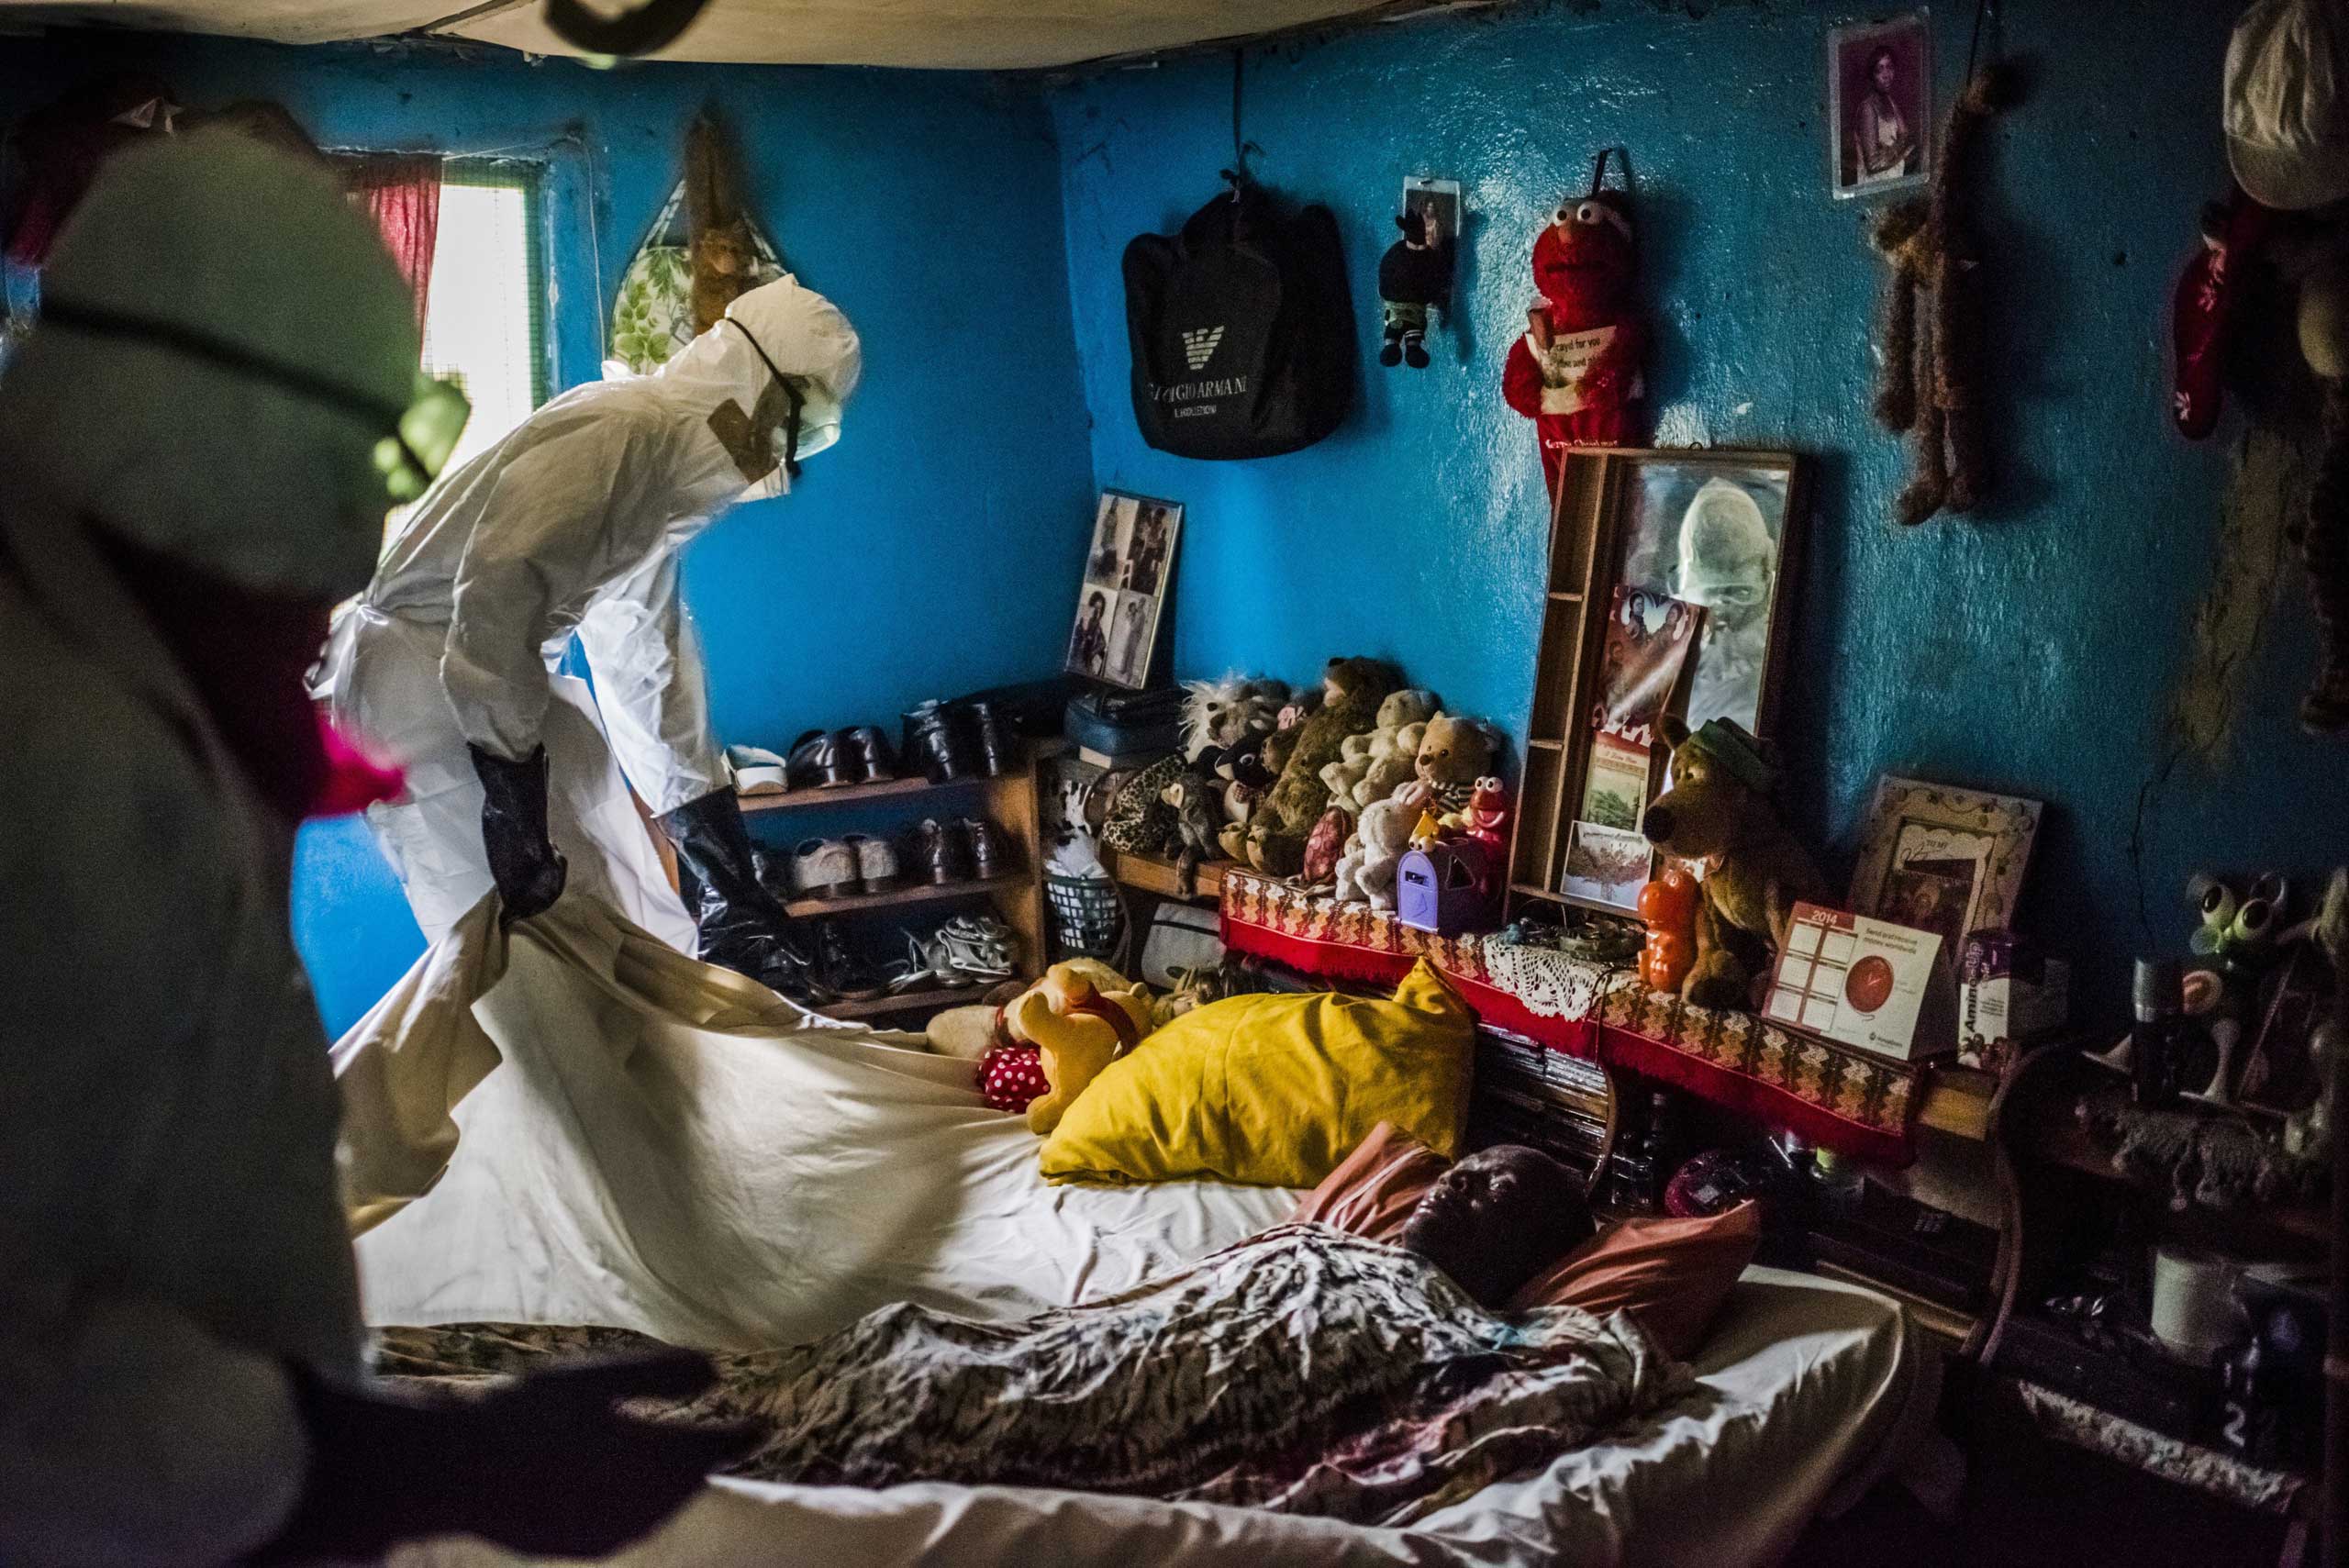 Sept. 17, 2014. A Liberian Red Cross burial team remove the body of a suspected Ebola victim from a home in Monrovia, Liberia.